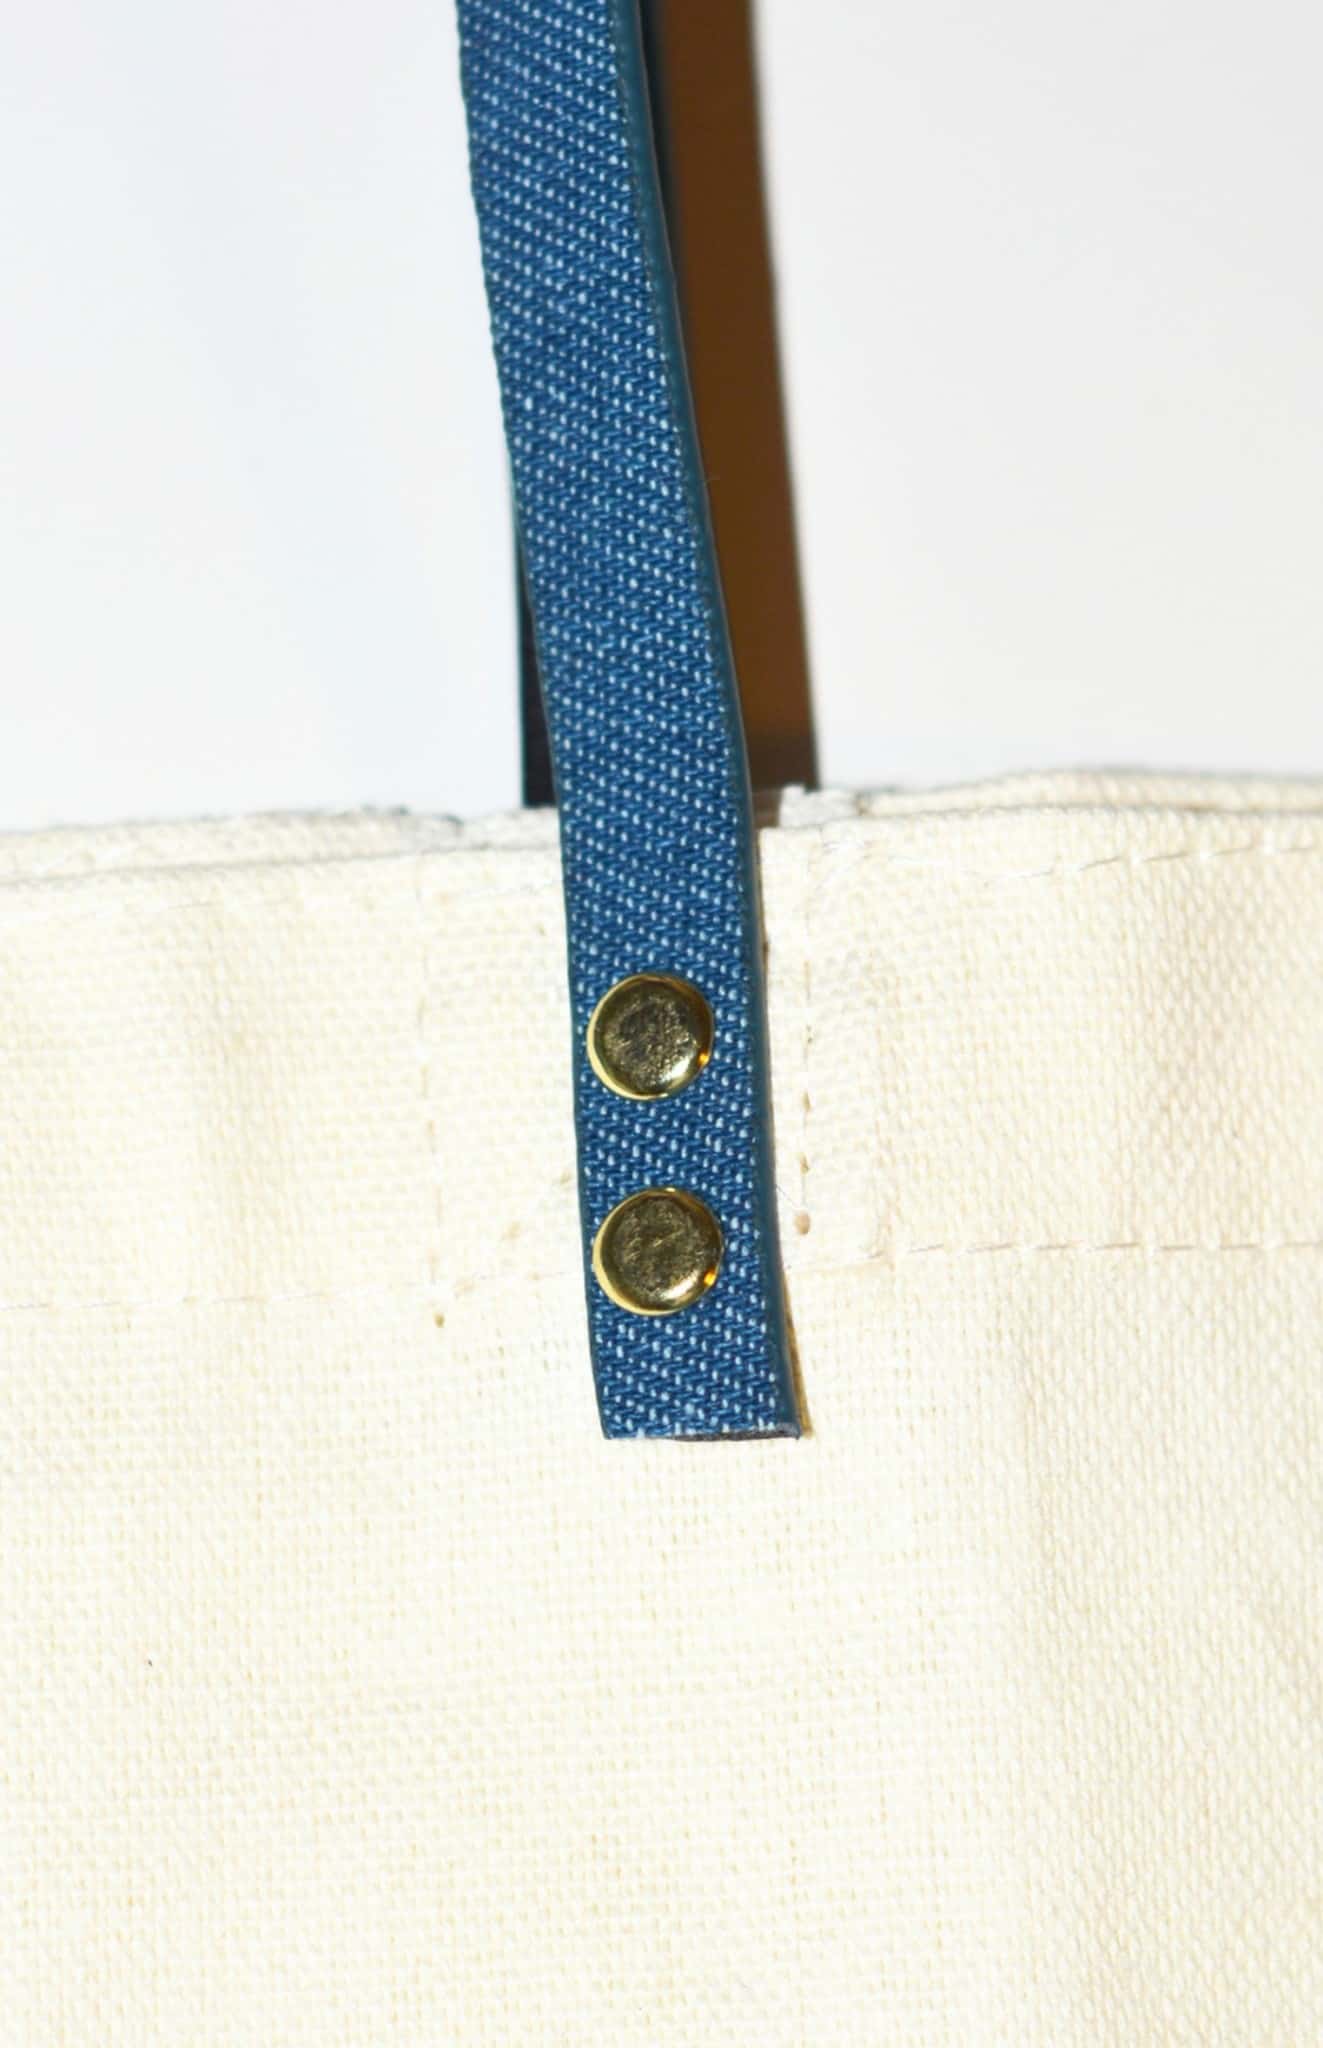 Belt attached to the tote as a handle